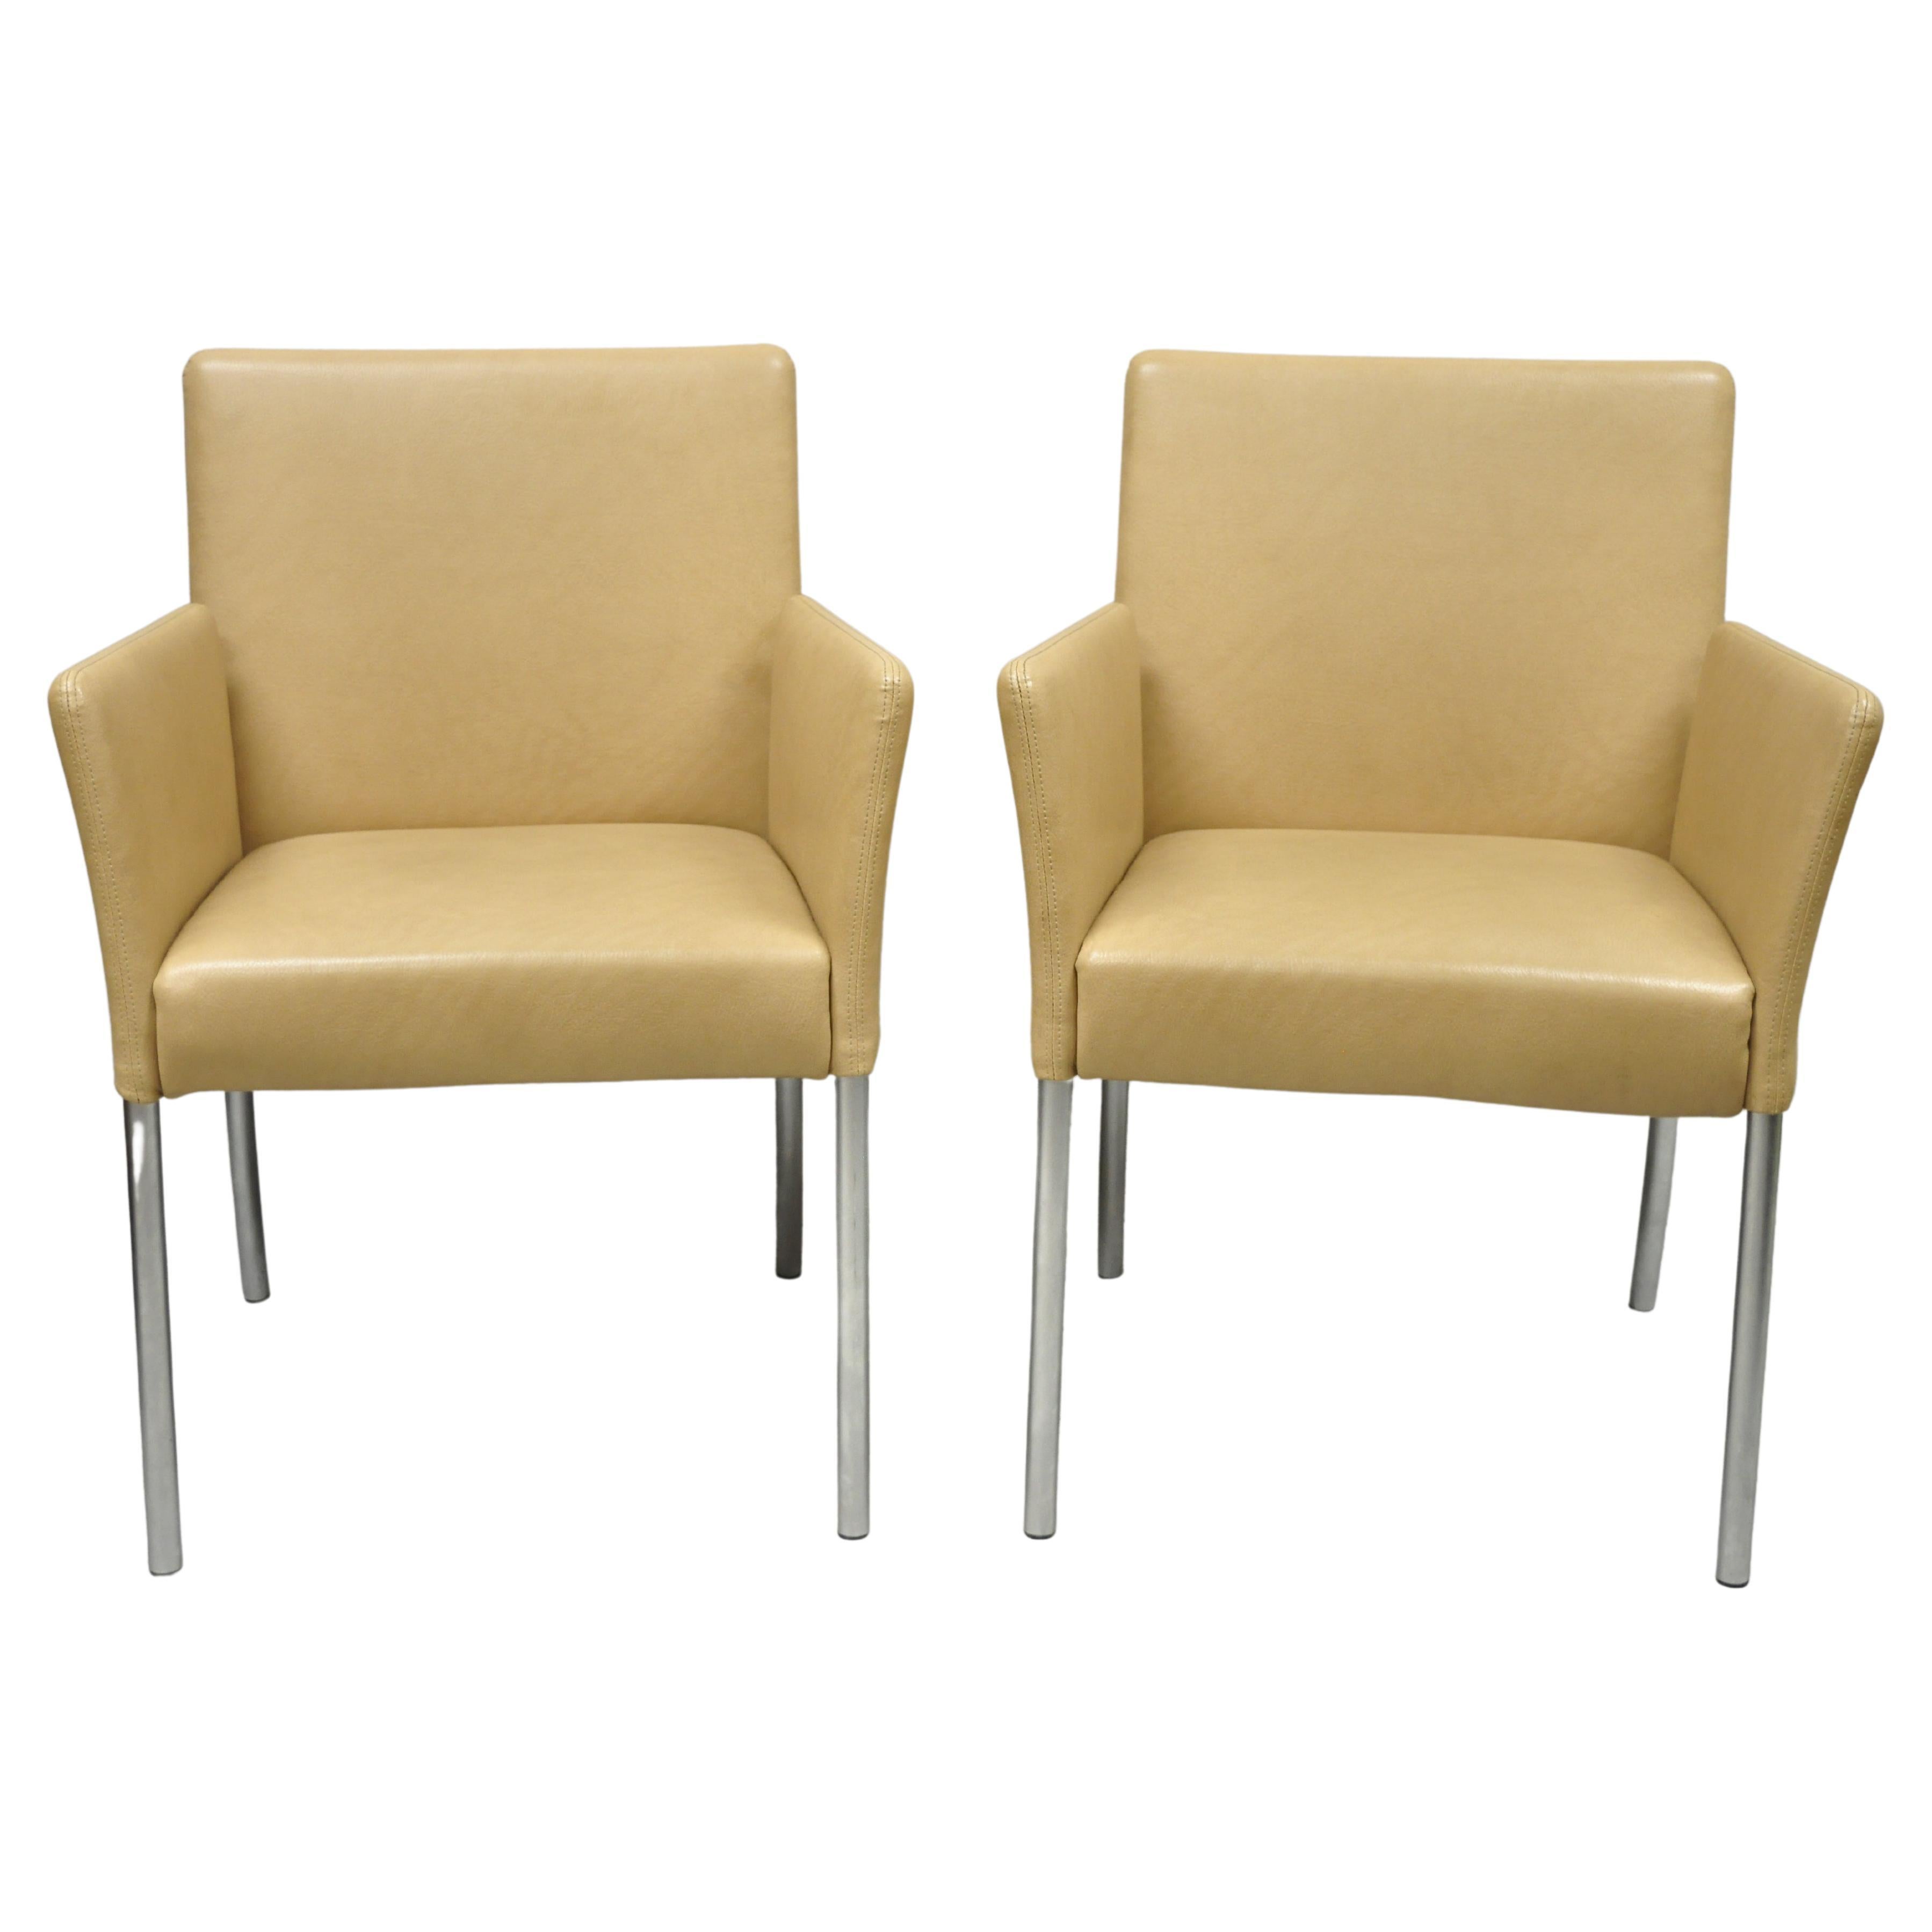 Coalesce Steelcase Beige Leather Model 1510 Switch Guest Arm Chair 'A', a Pair